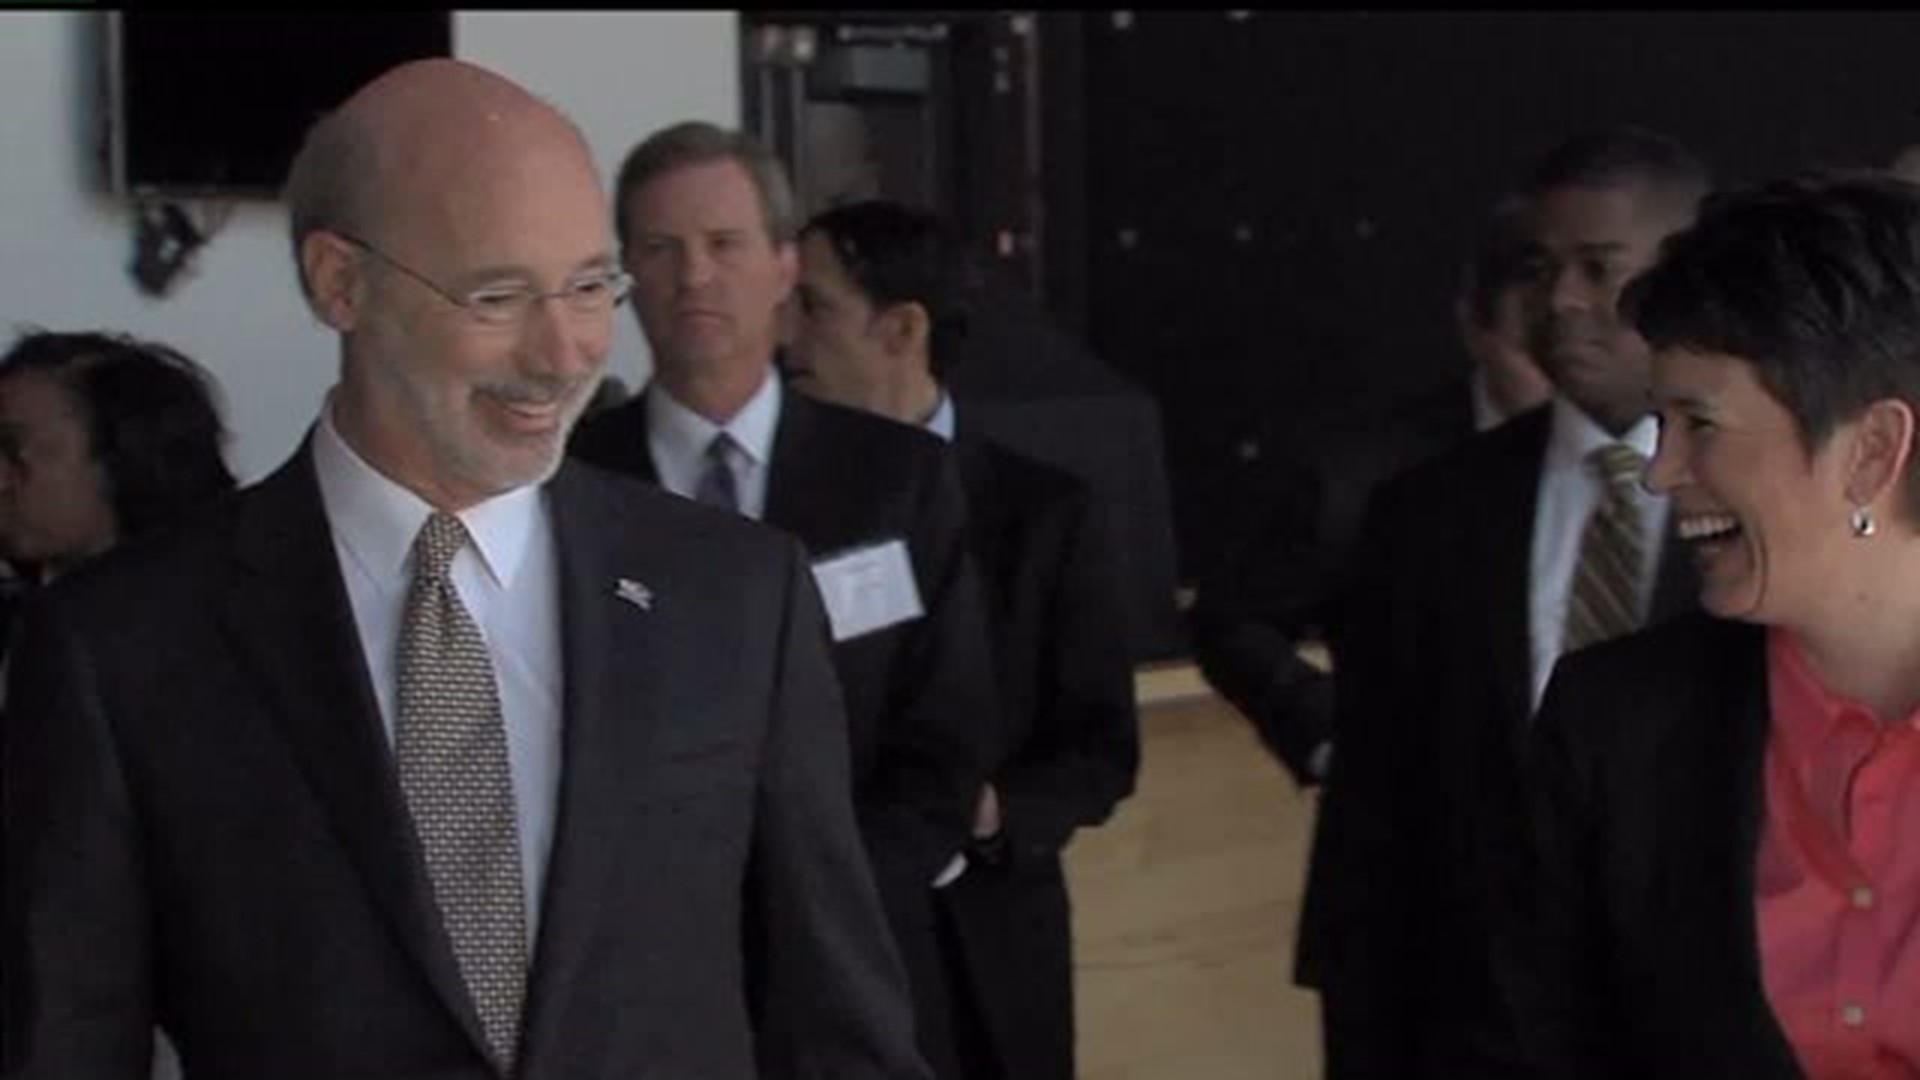 Governor Tom Wolf unveiling his new tax plan